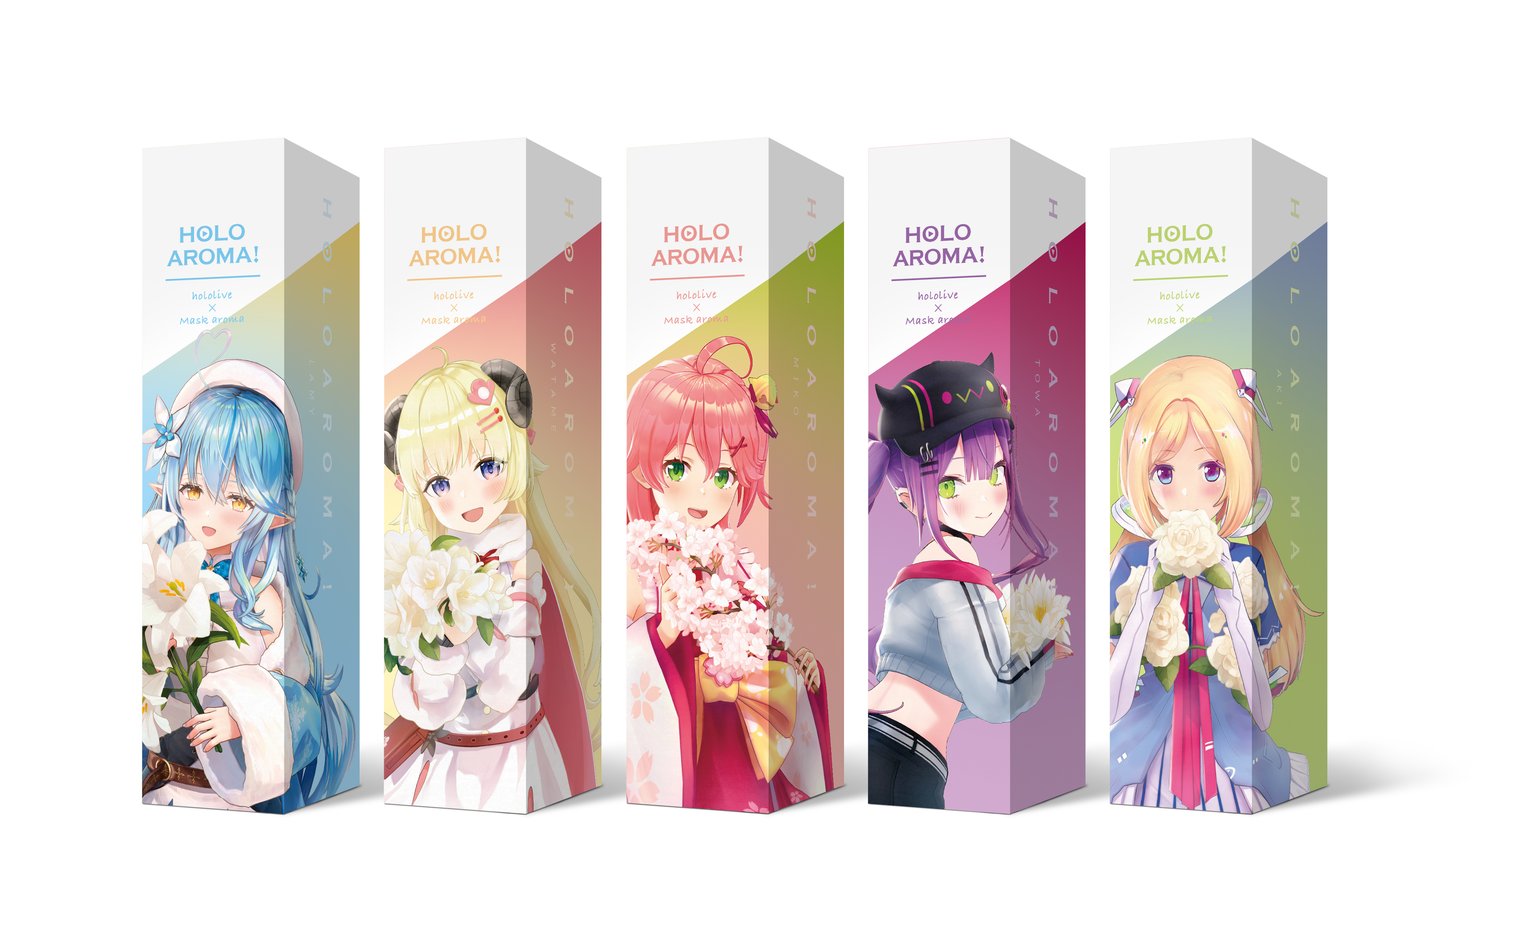 HOLO AROMA! Second Round - Package